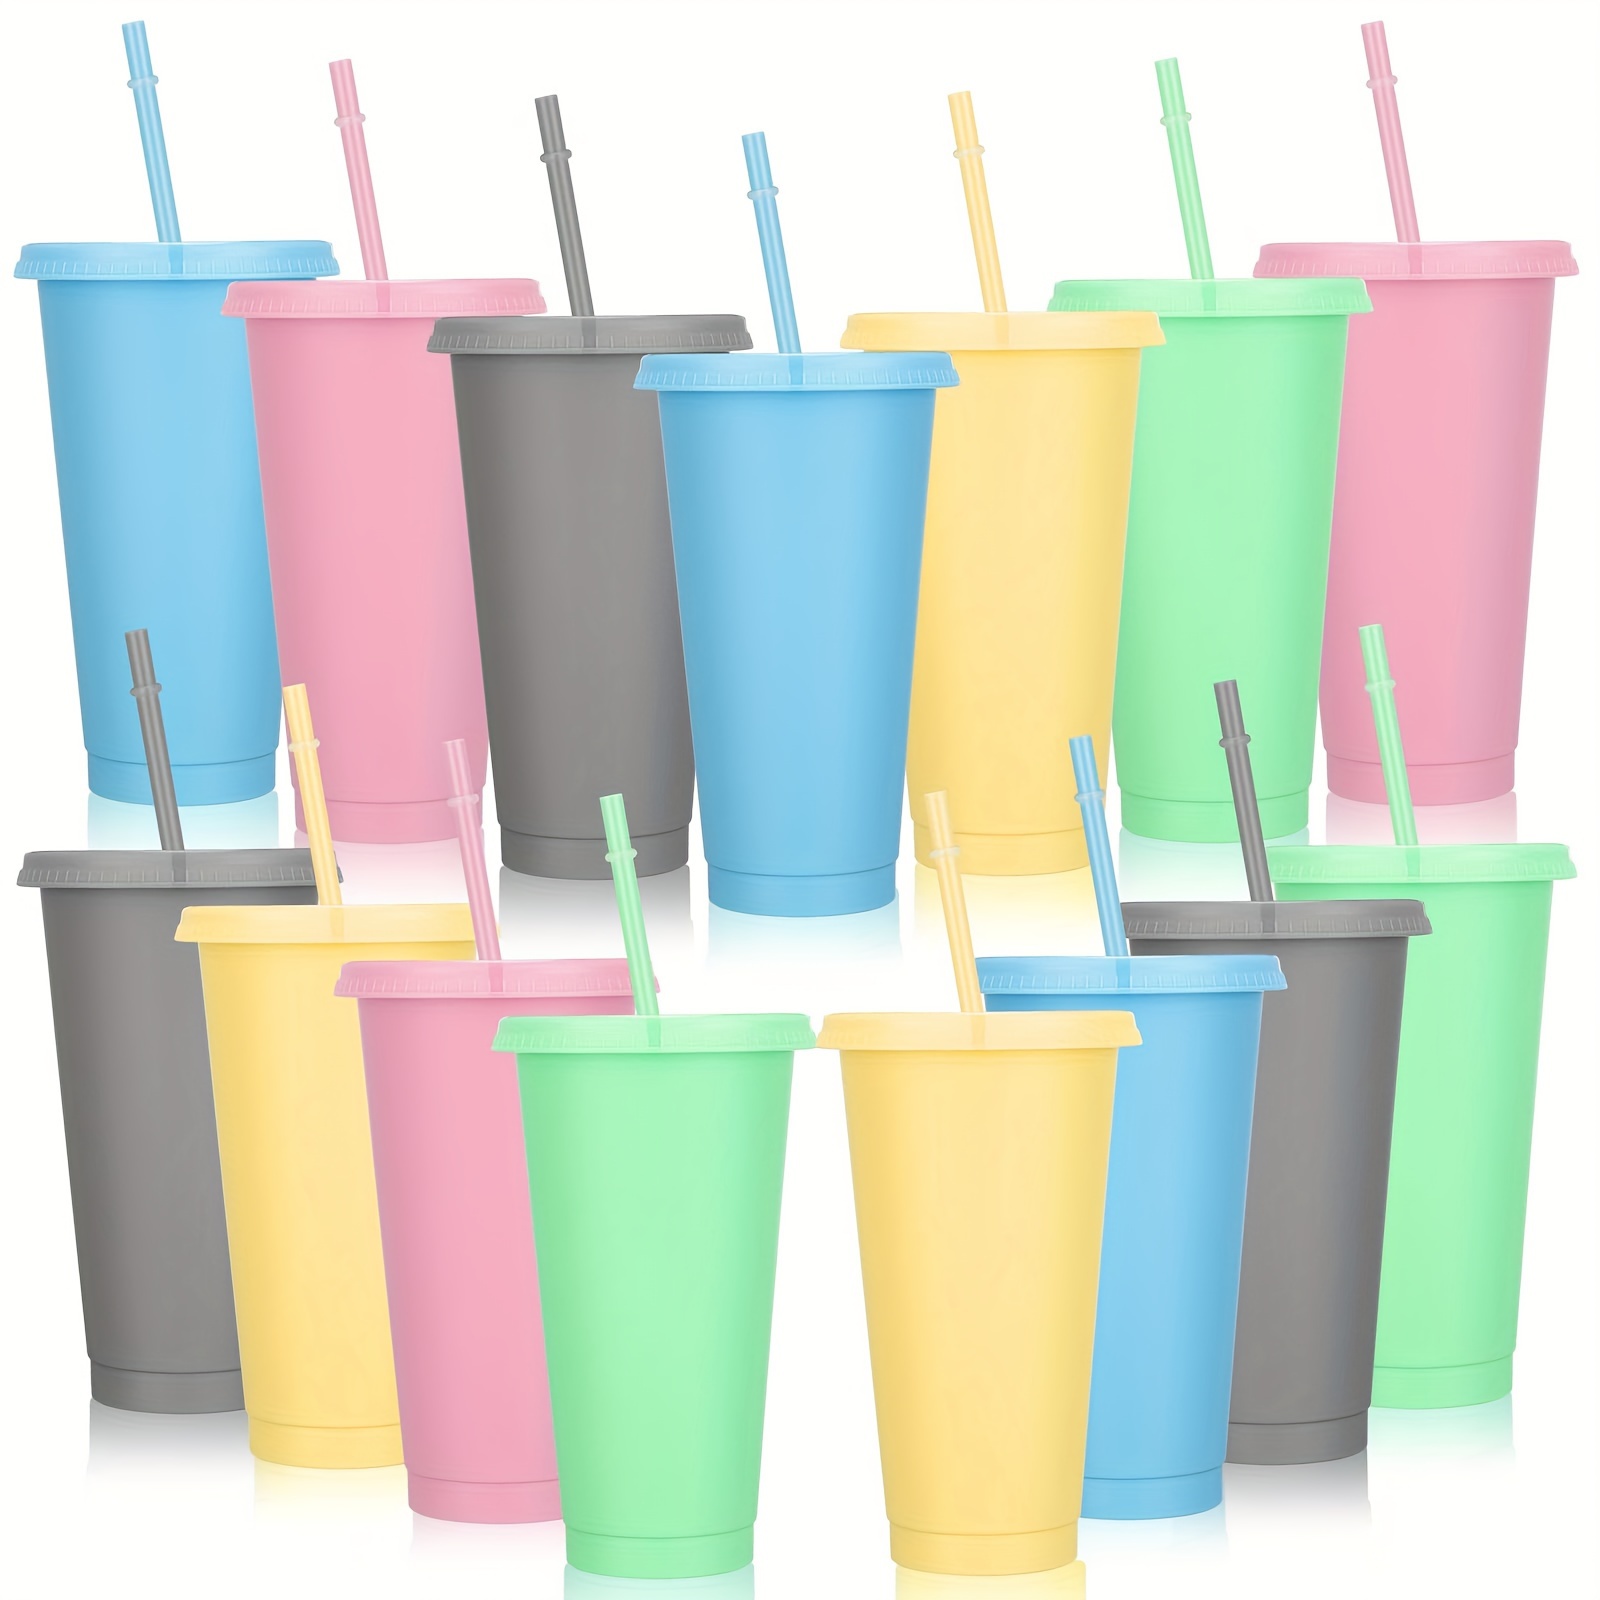 

5-piece 710ml/24oz Reusable Drinking Water Cup Set, Portable Leakproof Water Bottle With Straws & Lids - Ideal For Iced Coffee, Smoothies, & Cold Beverages